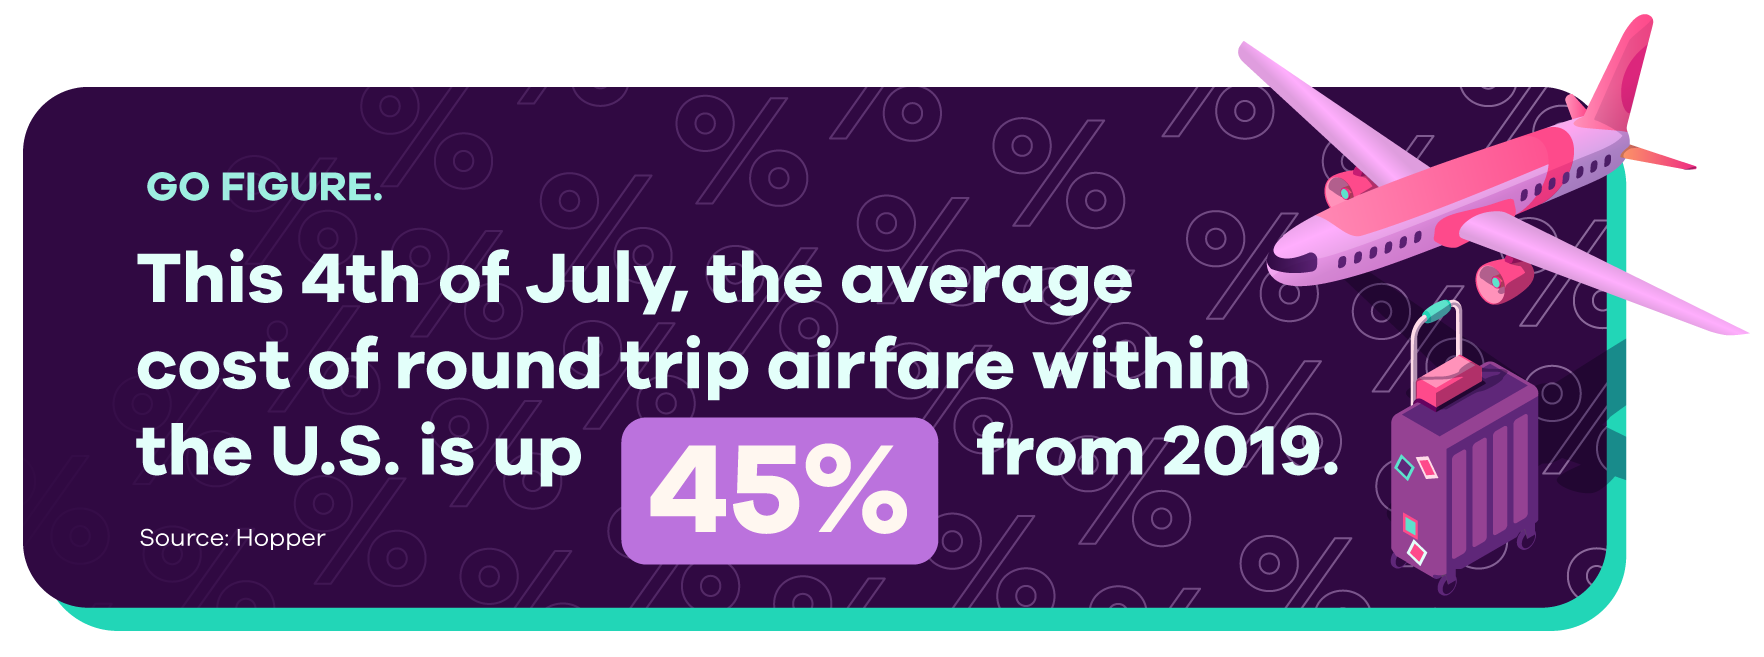 Illustration of an airplane and a suitcase with text: Go Figure: This 4th of July, the average cost of round trip airfare within the U.S. is up 45% from 2019. Source: Hopper